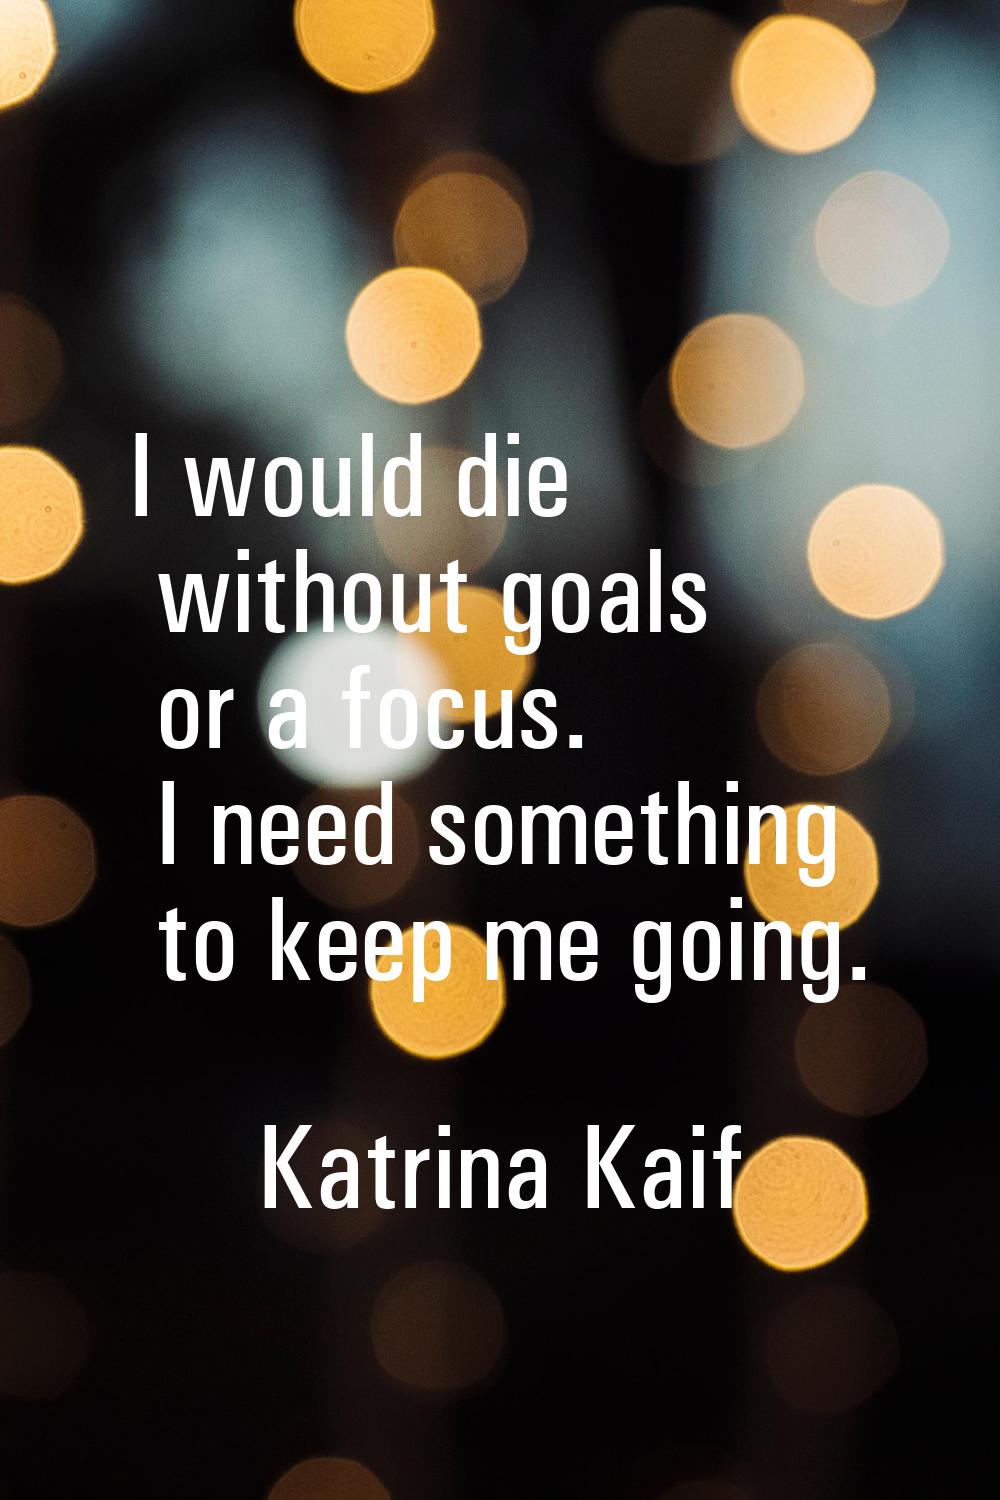 I would die without goals or a focus. I need something to keep me going.